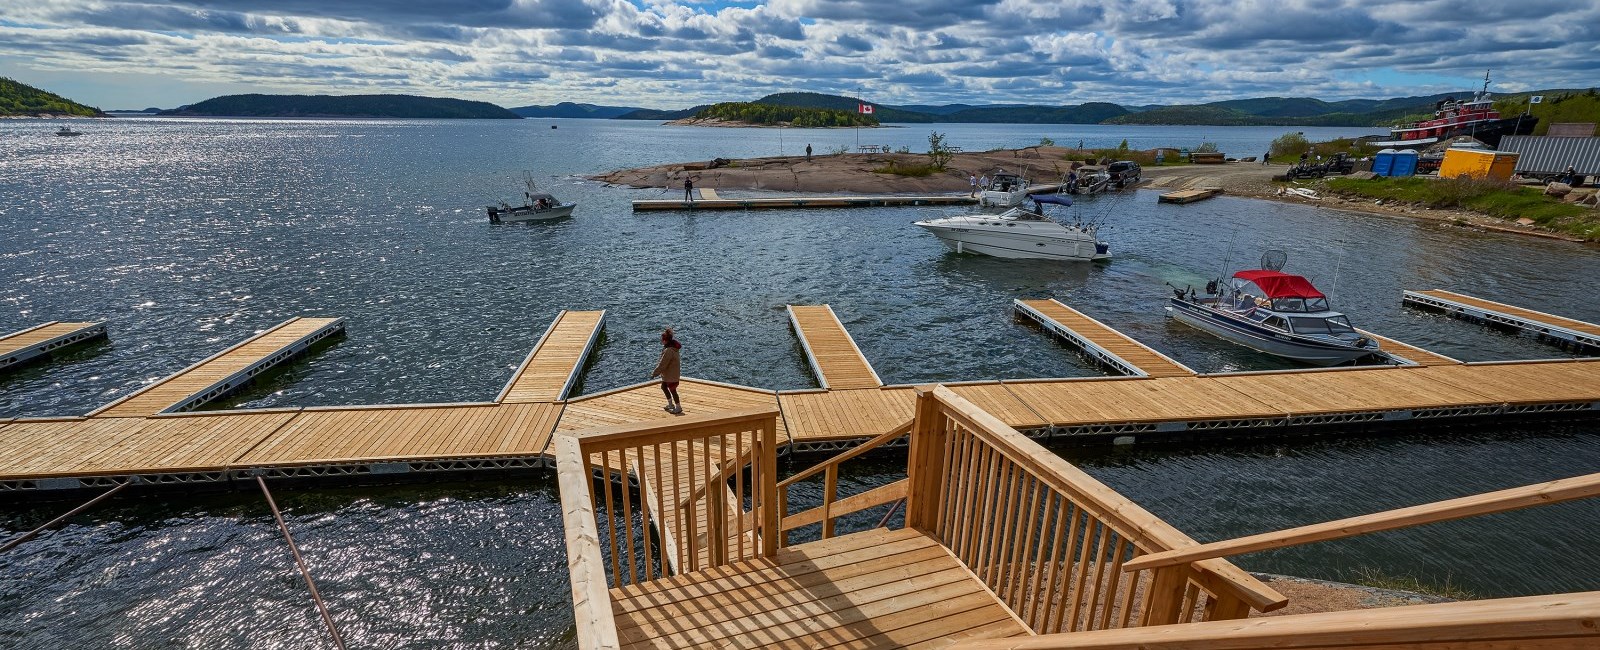 wooden docks and boat launch